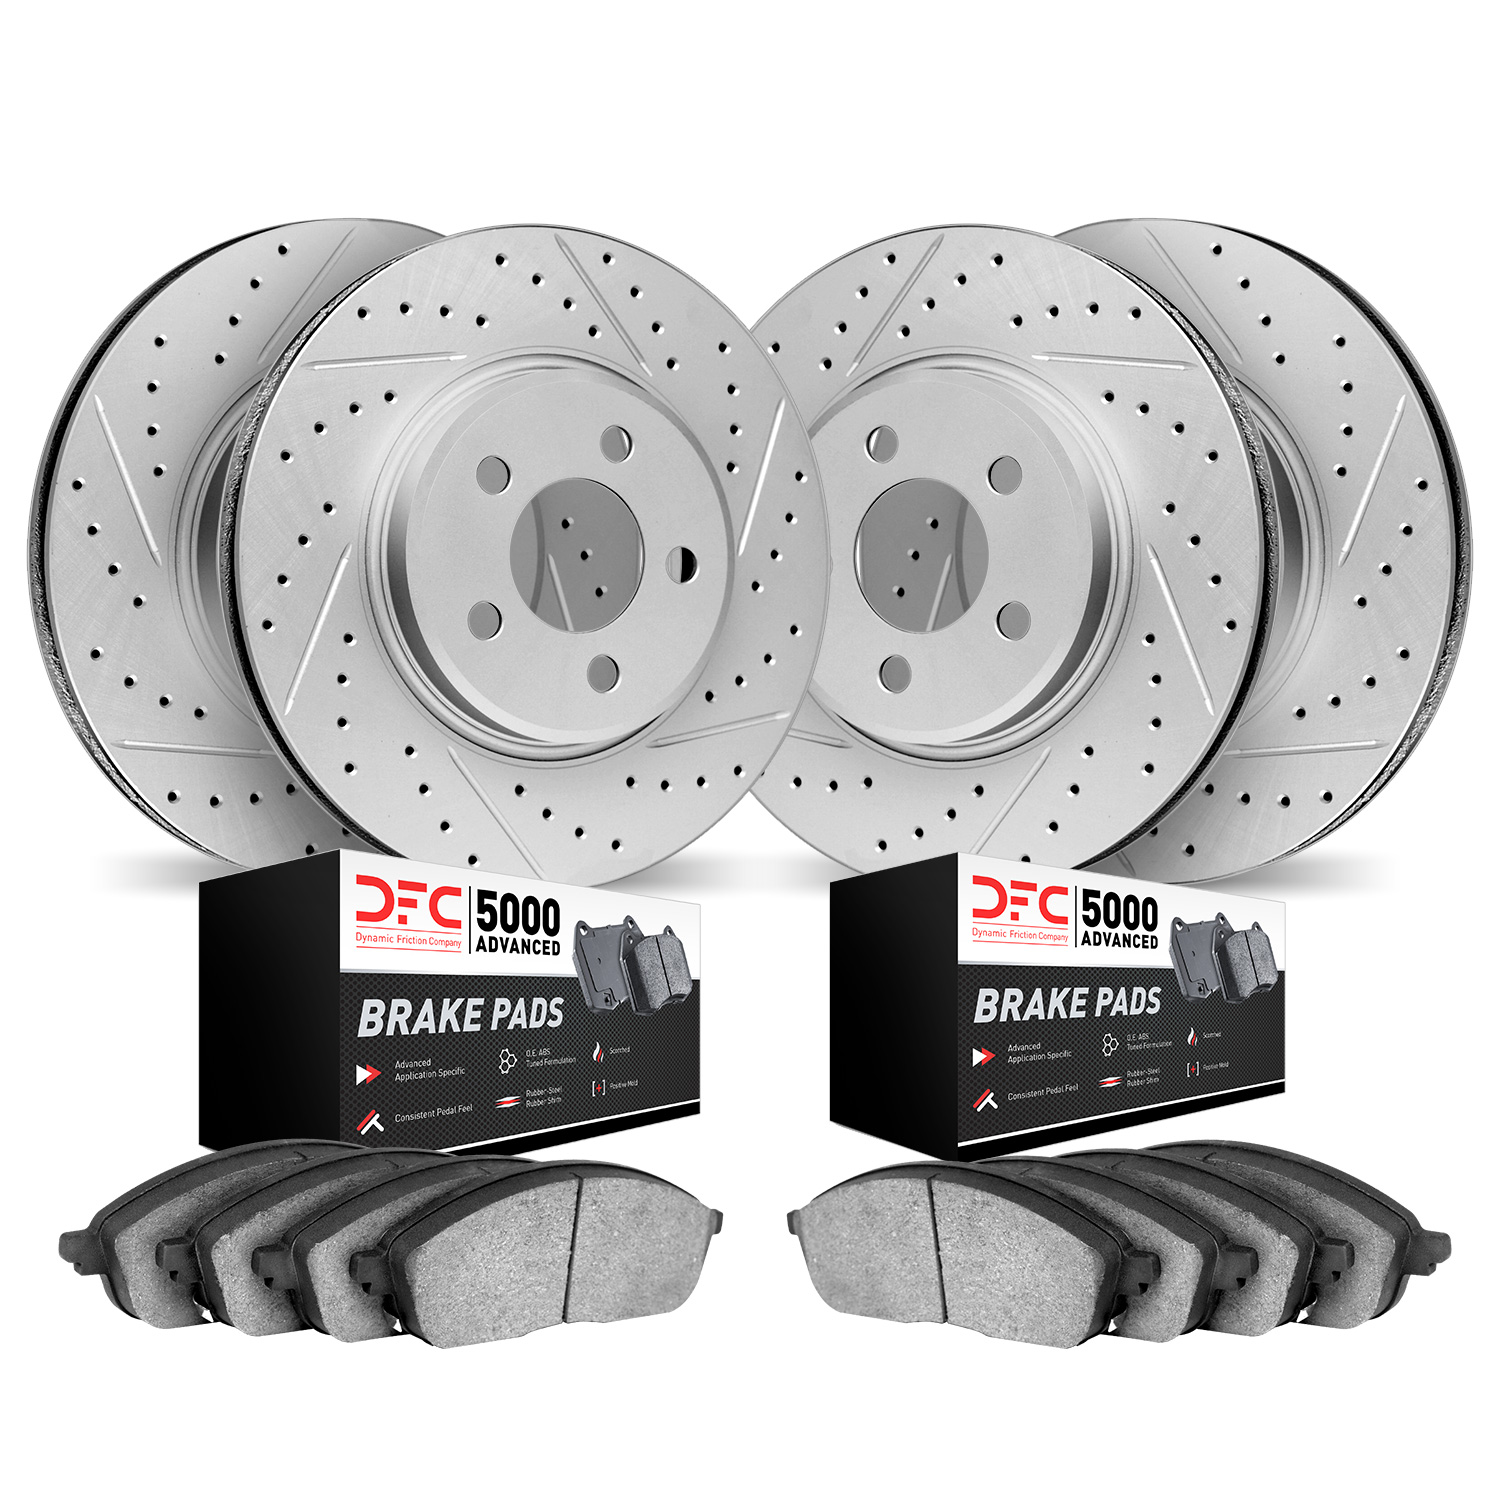 2504-54201 Geoperformance Drilled/Slotted Rotors w/5000 Advanced Brake Pads Kit, 2007-2011 Ford/Lincoln/Mercury/Mazda, Position: